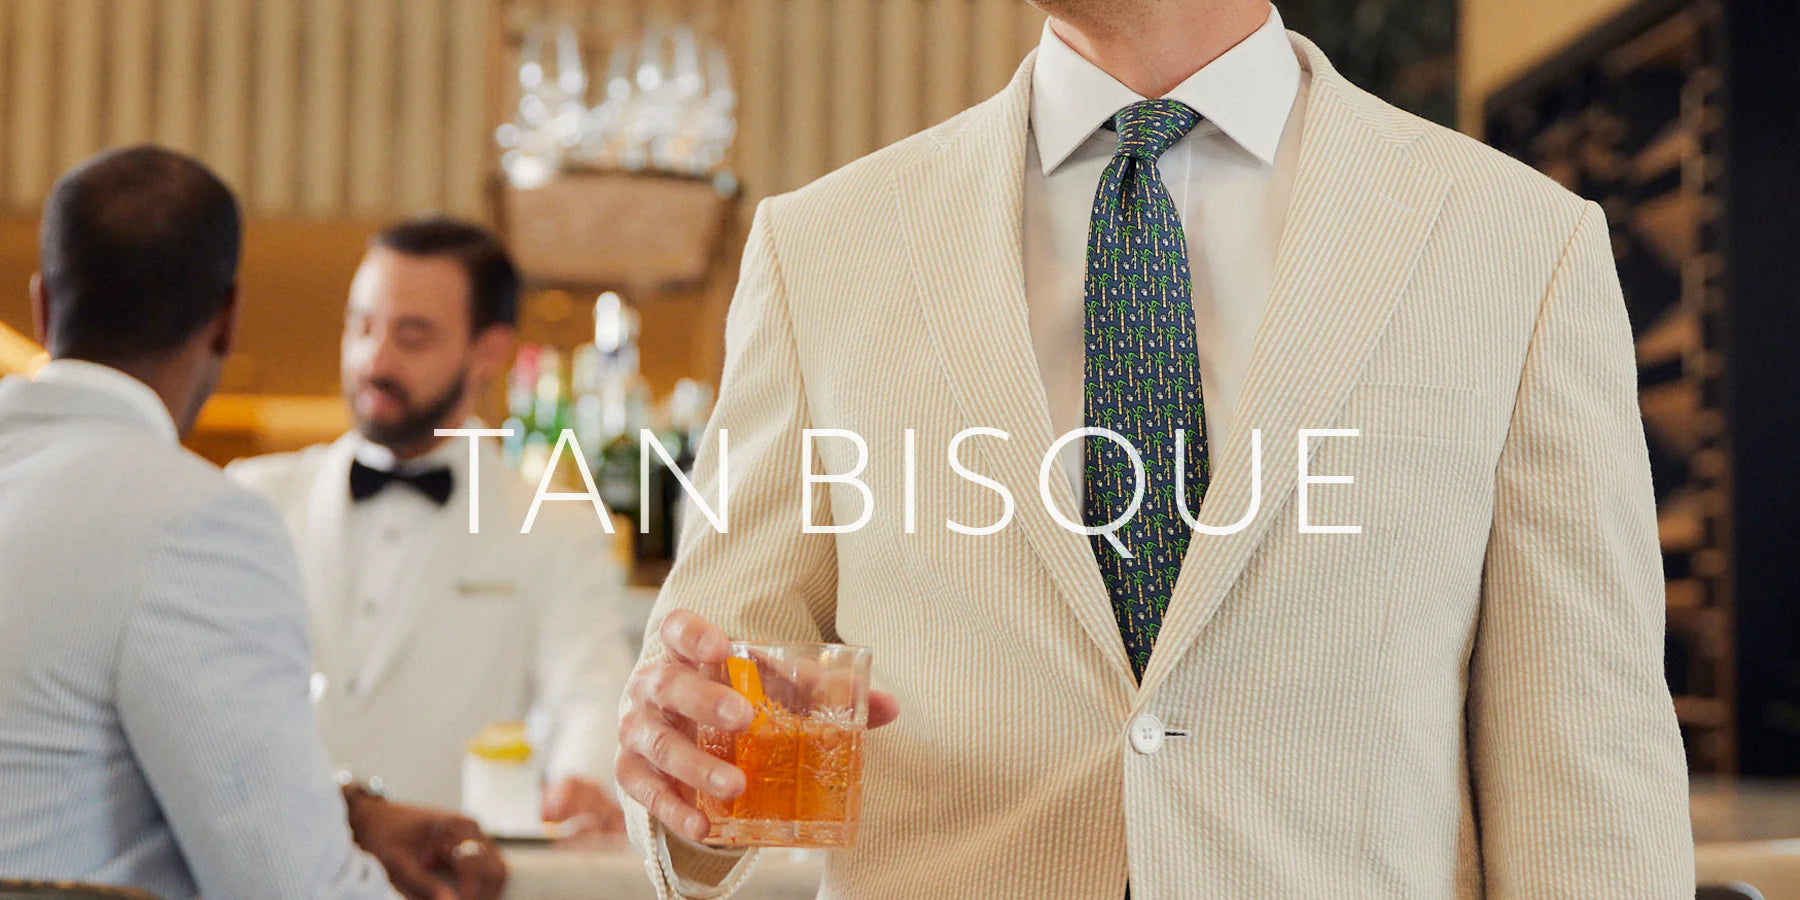 WHAT TO WEAR - TAN BISQUE